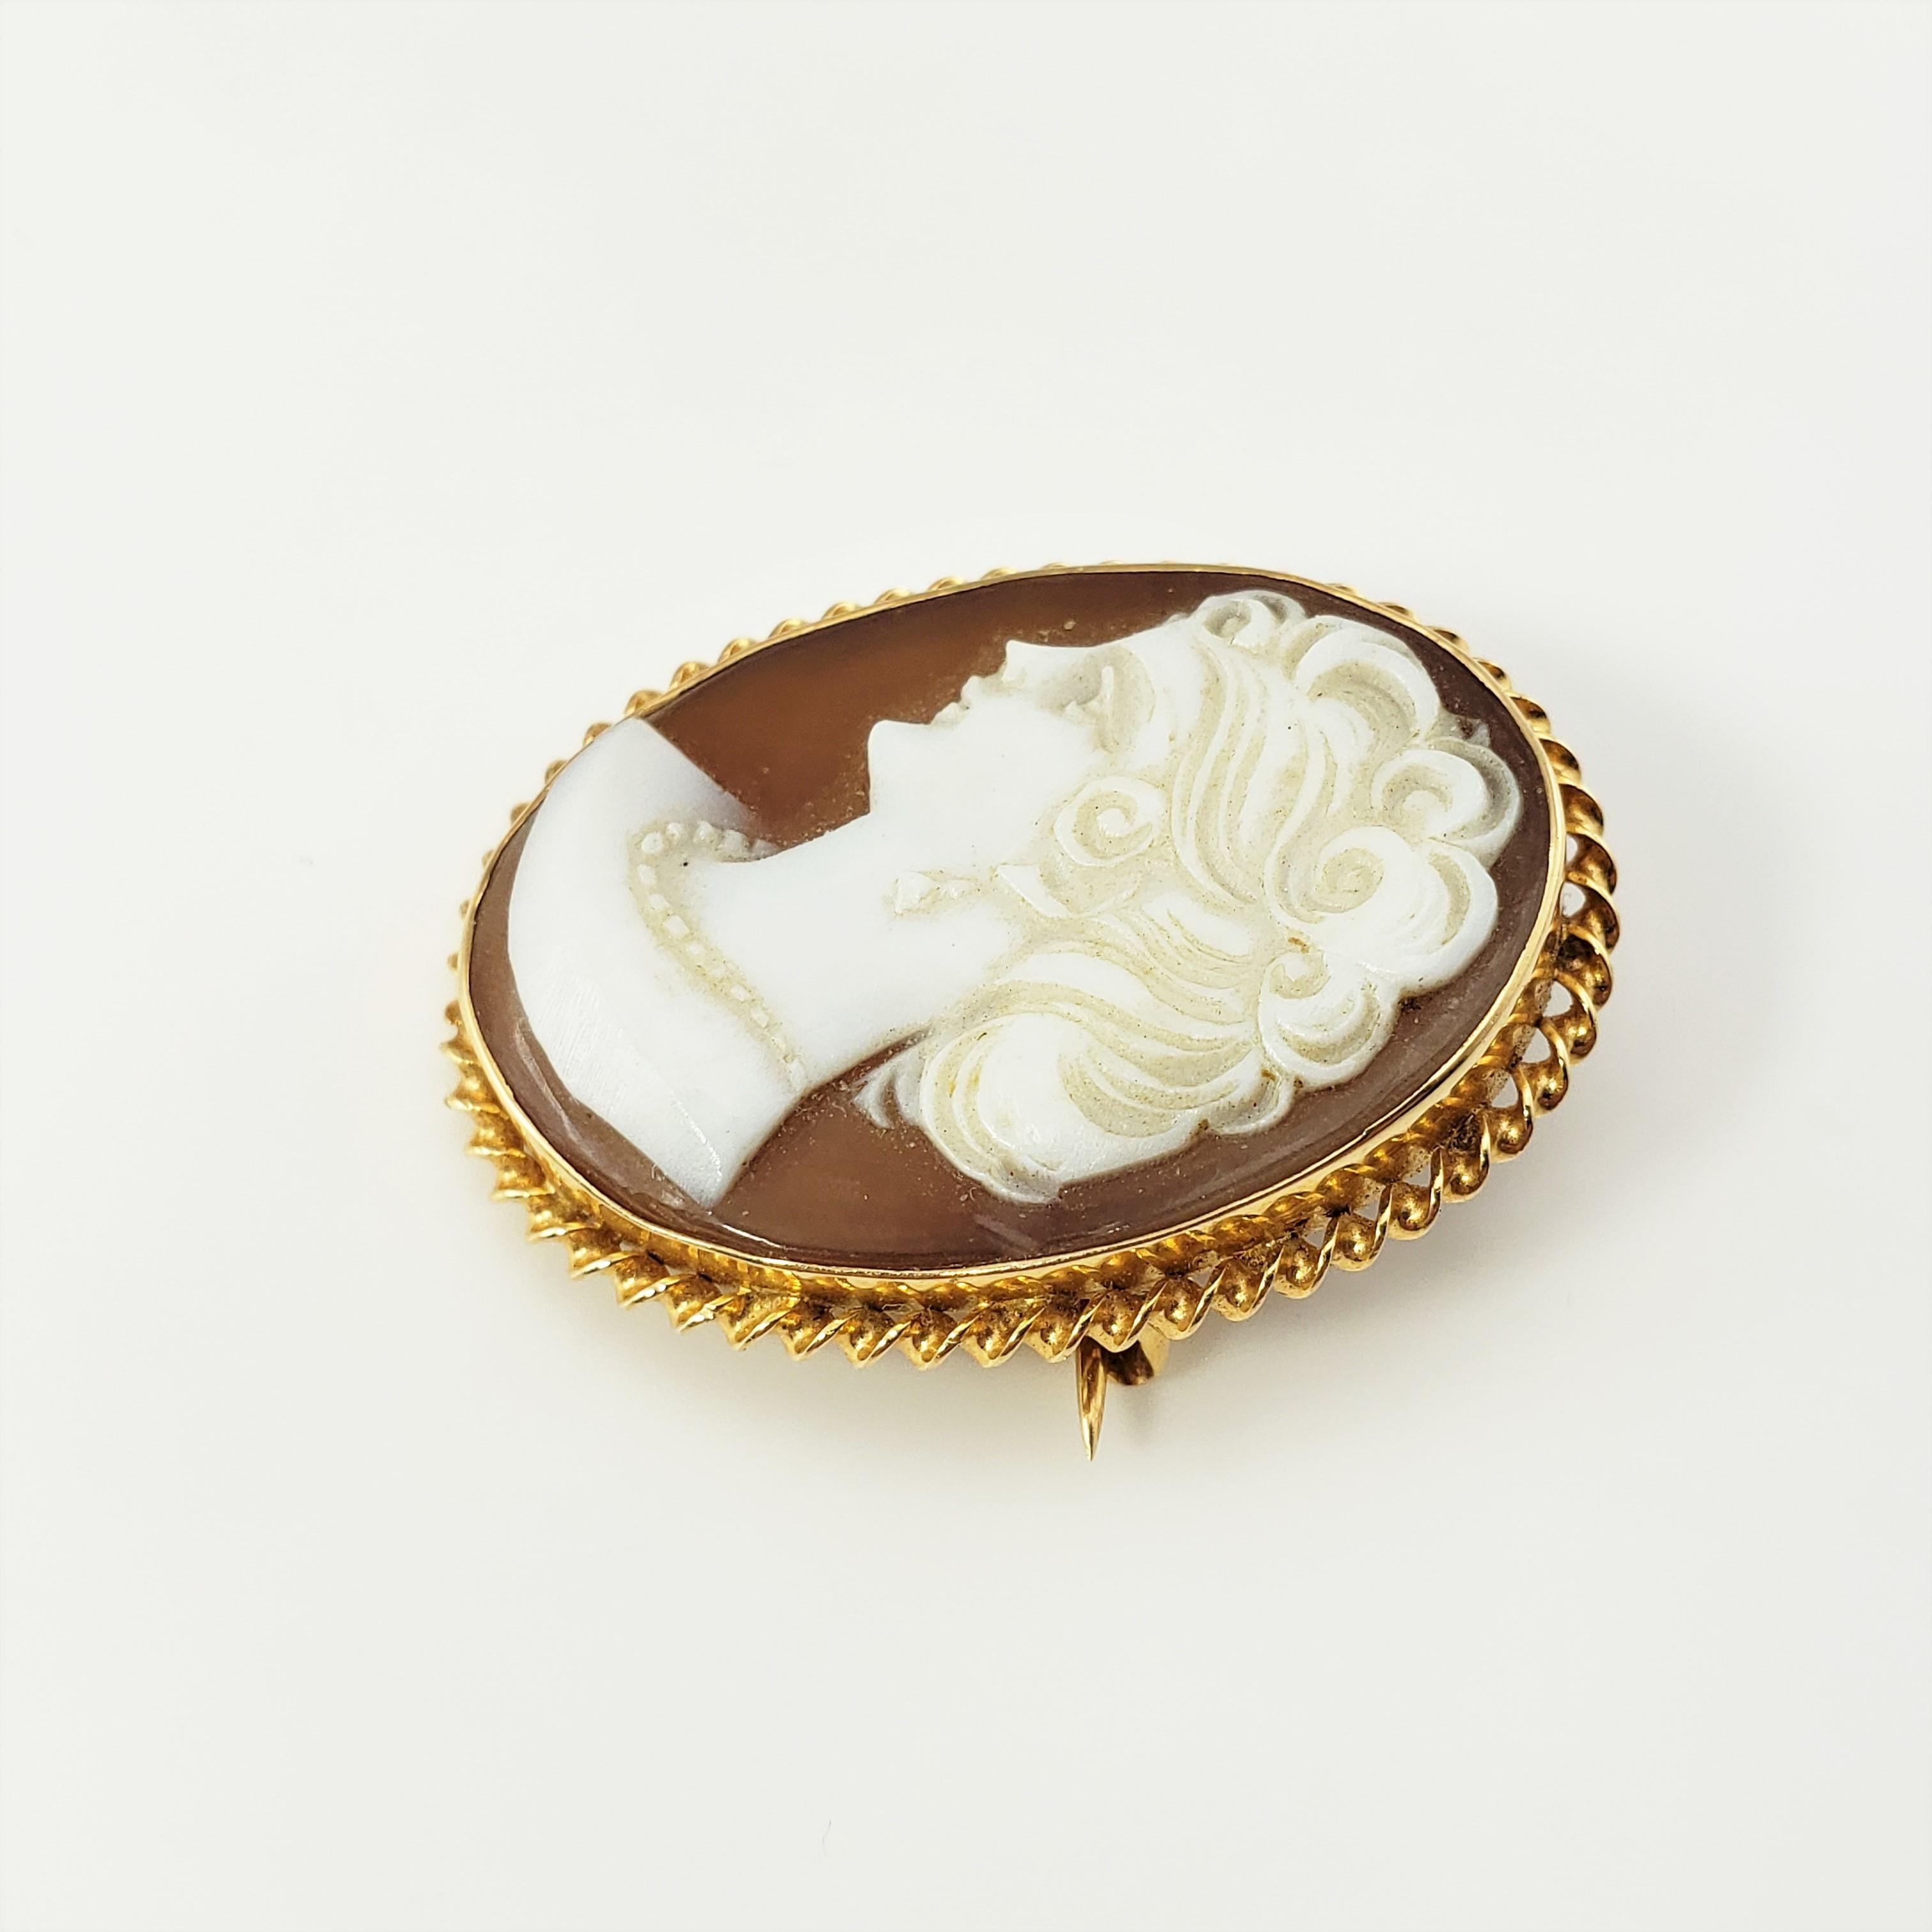 14 Karat Yellow Gold Cameo Brooch/Pendant-

This lovely cameo features a lovely lady set in beautifully detailed 14K yellow gold.  Can be worn as a brooch or a pendant.

Size:  28 mm x  21 mm 

Weight:  2.7 dwt. /  4.2 gr.

Stamped: 14K

Very good